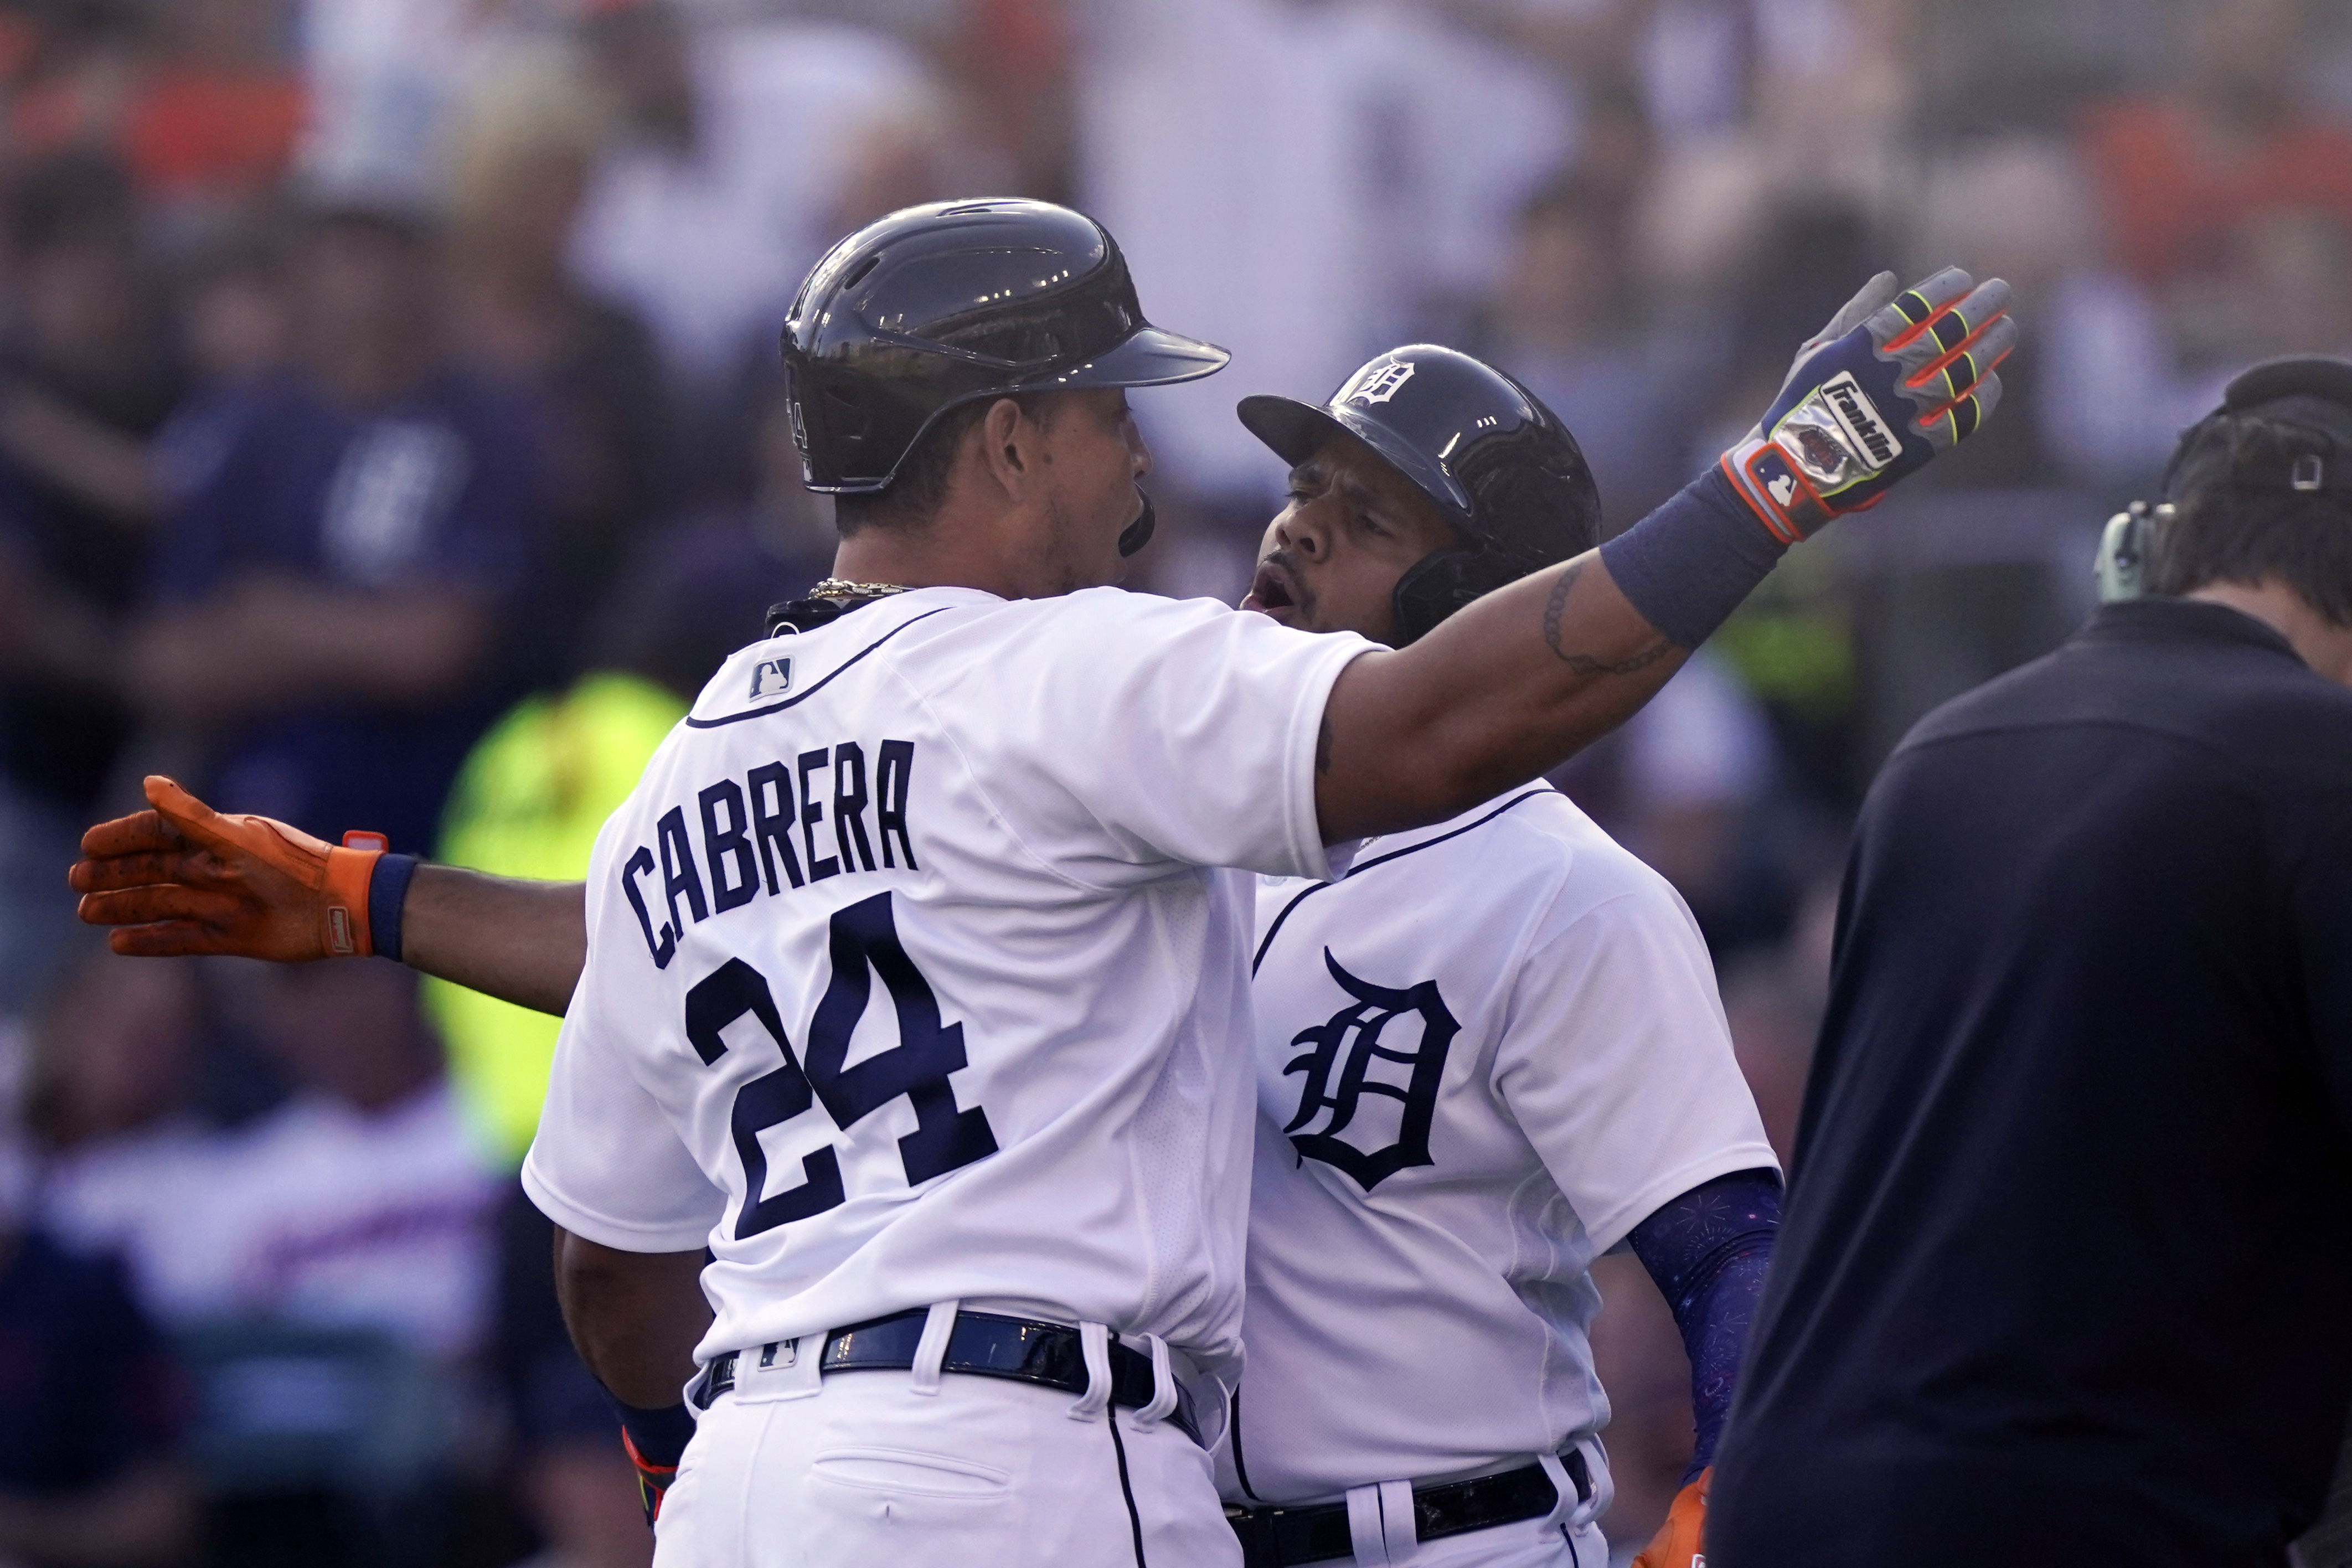 Cabrera doesn't homer but leads Tigers over Indians 6-4